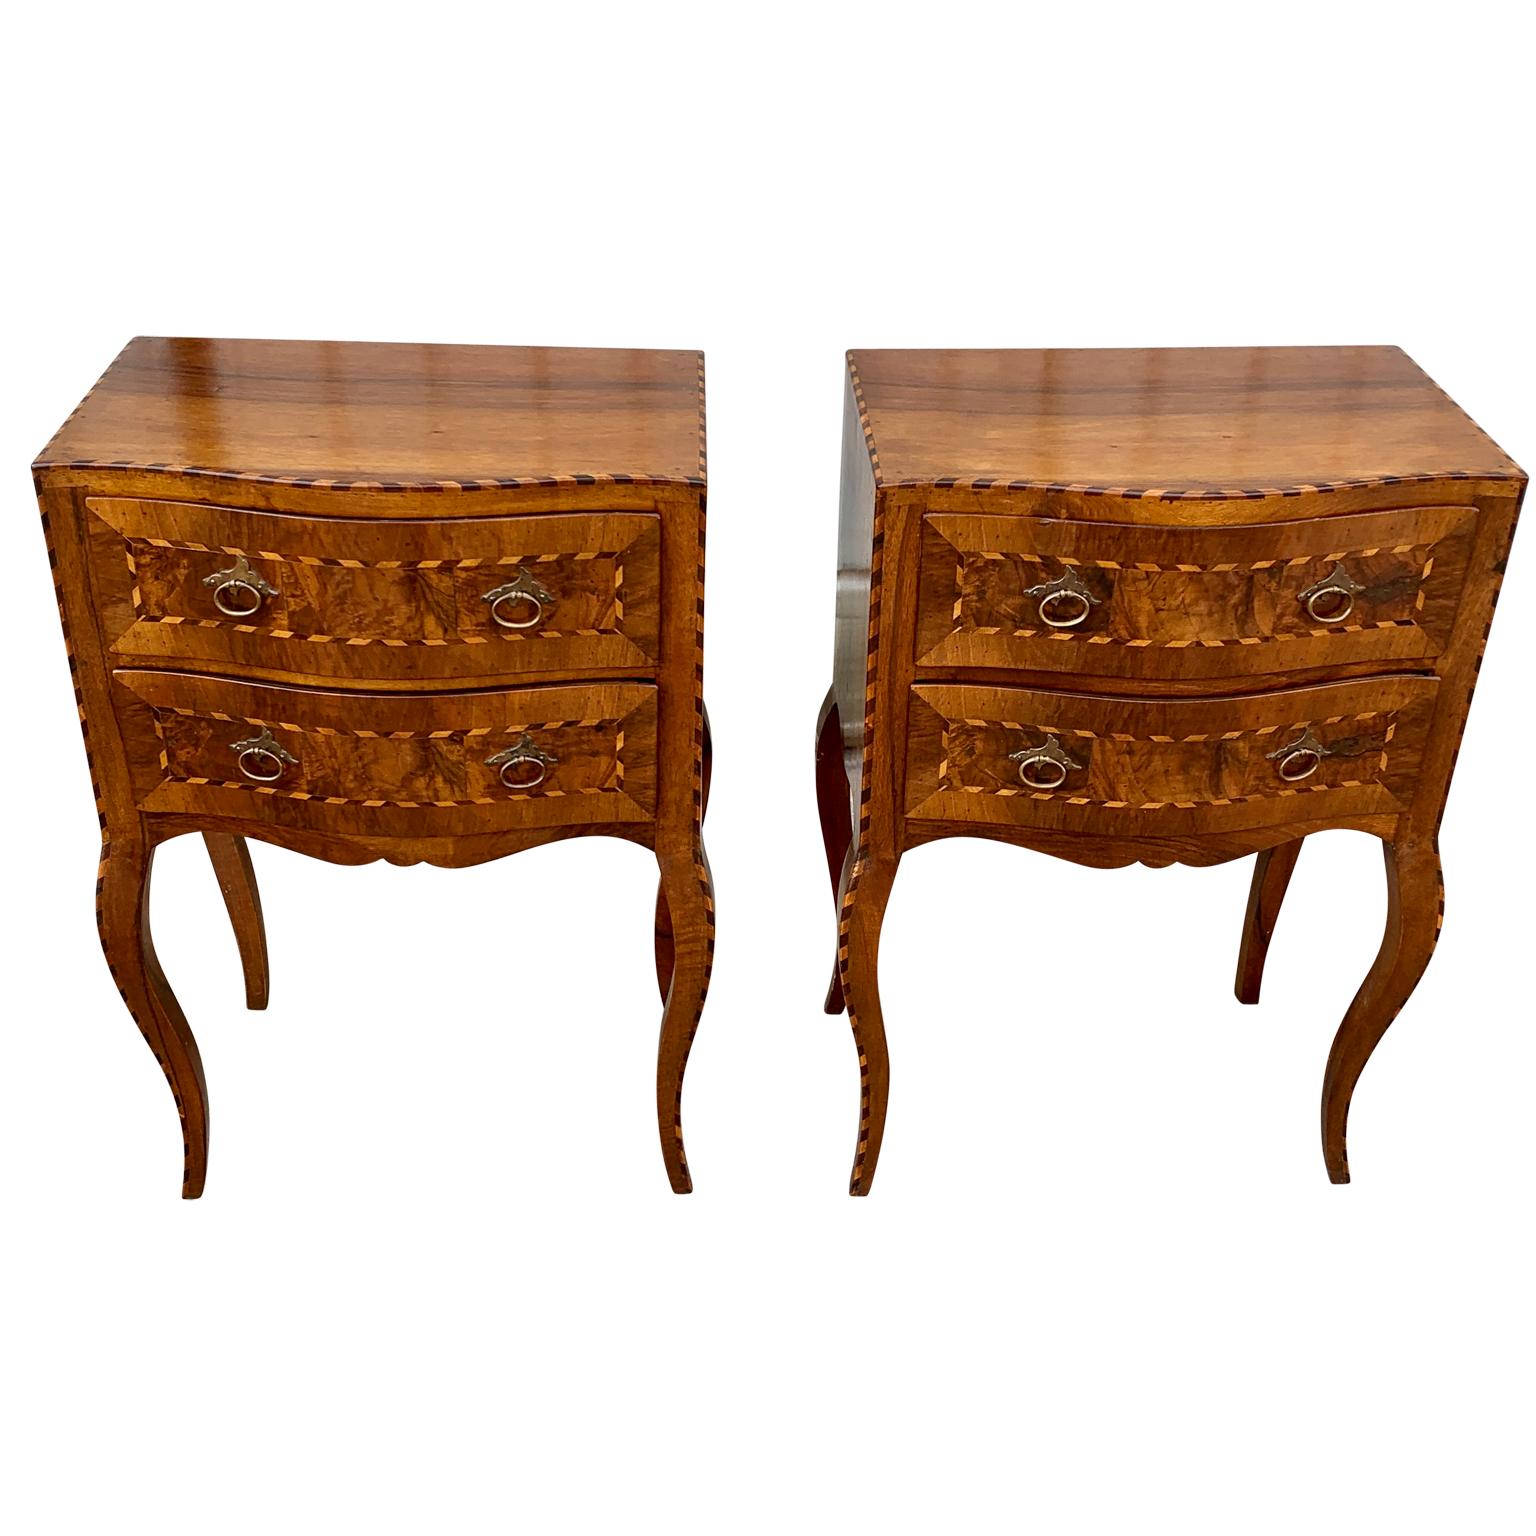 Pair of Italian Antique Nightstands in Walnut and Brass Hardware